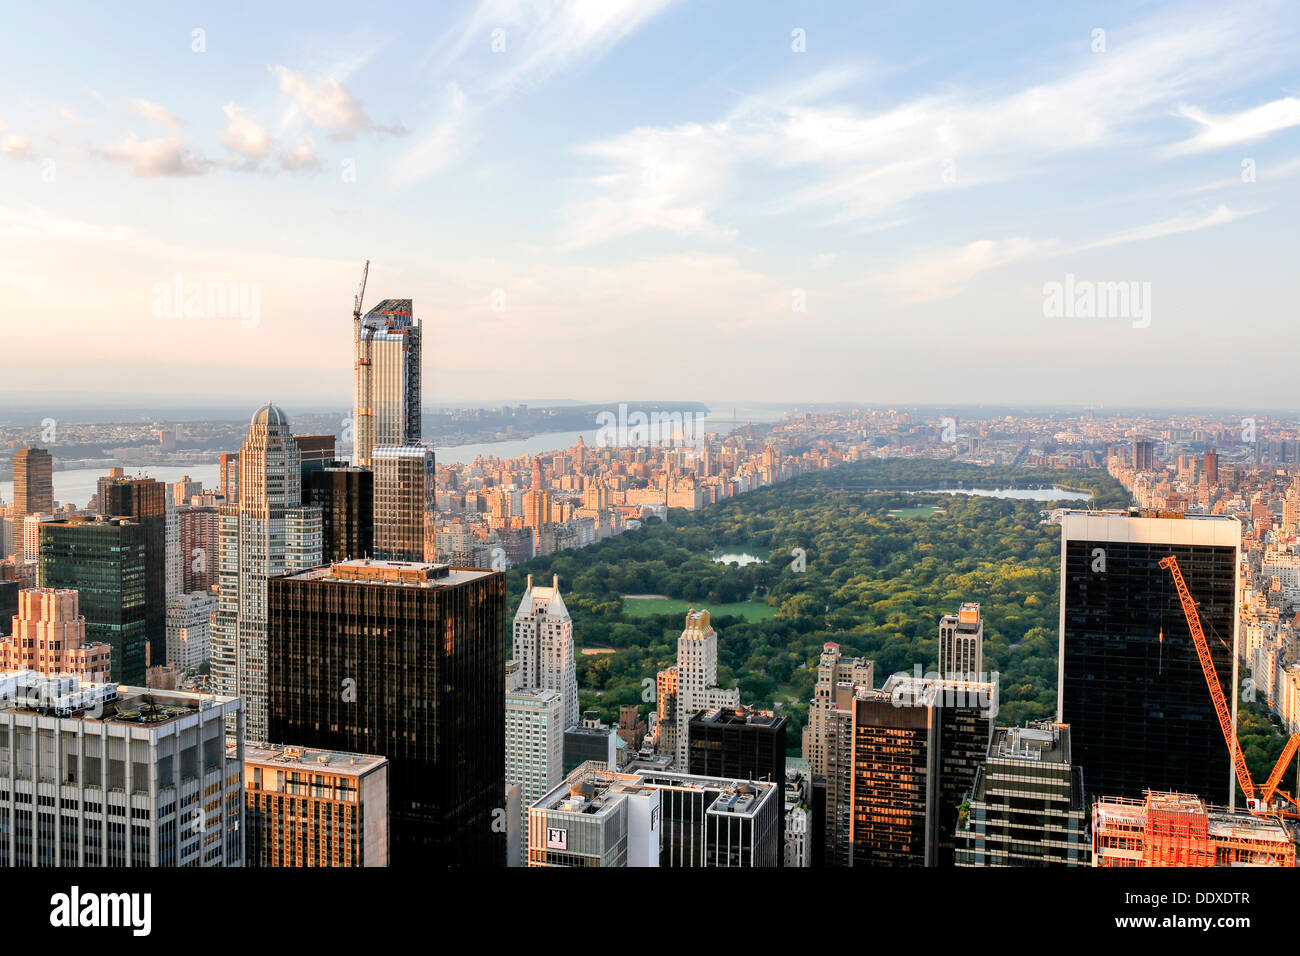 Looking Northwest Over Midtown Manhattan, Central Park, Upper West Side, Upper East Side and the Hudson River into New Jersey Stock Photo